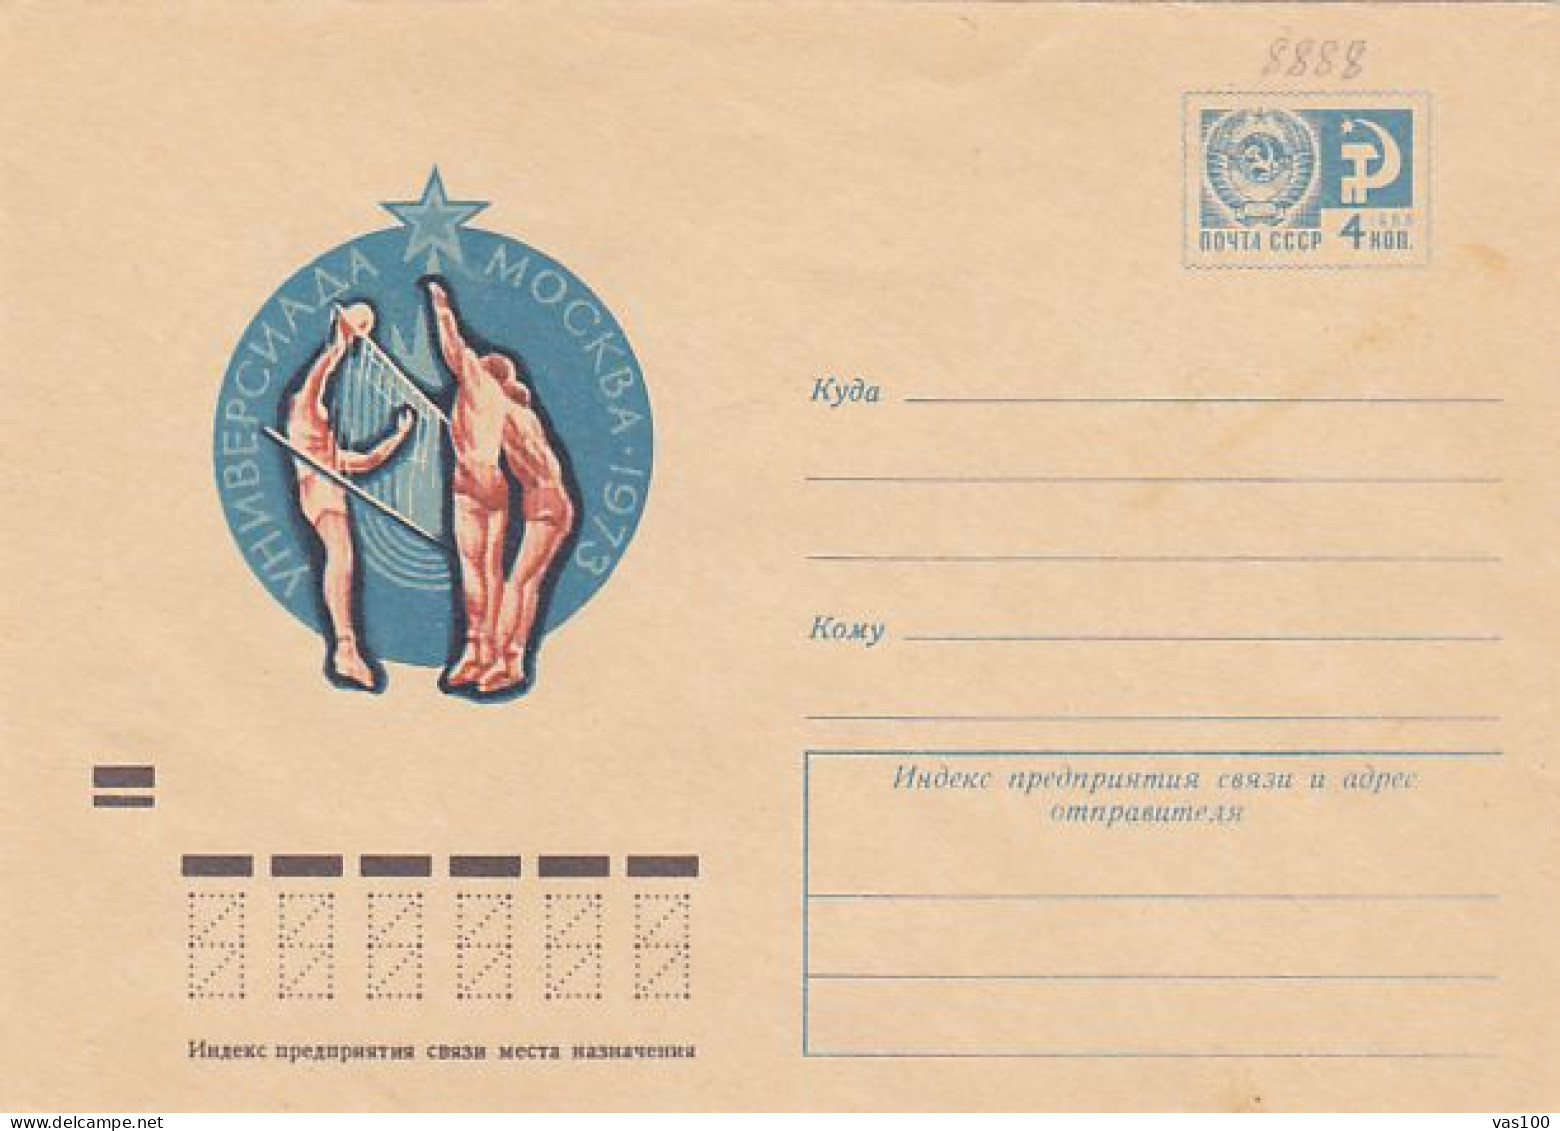 SPORTS, VOLLEYBALL, UNIVERSITY GAMES, COVER STATIONERY, ENTIER POSTAL, 1973, RUSSIA - Volley-Ball